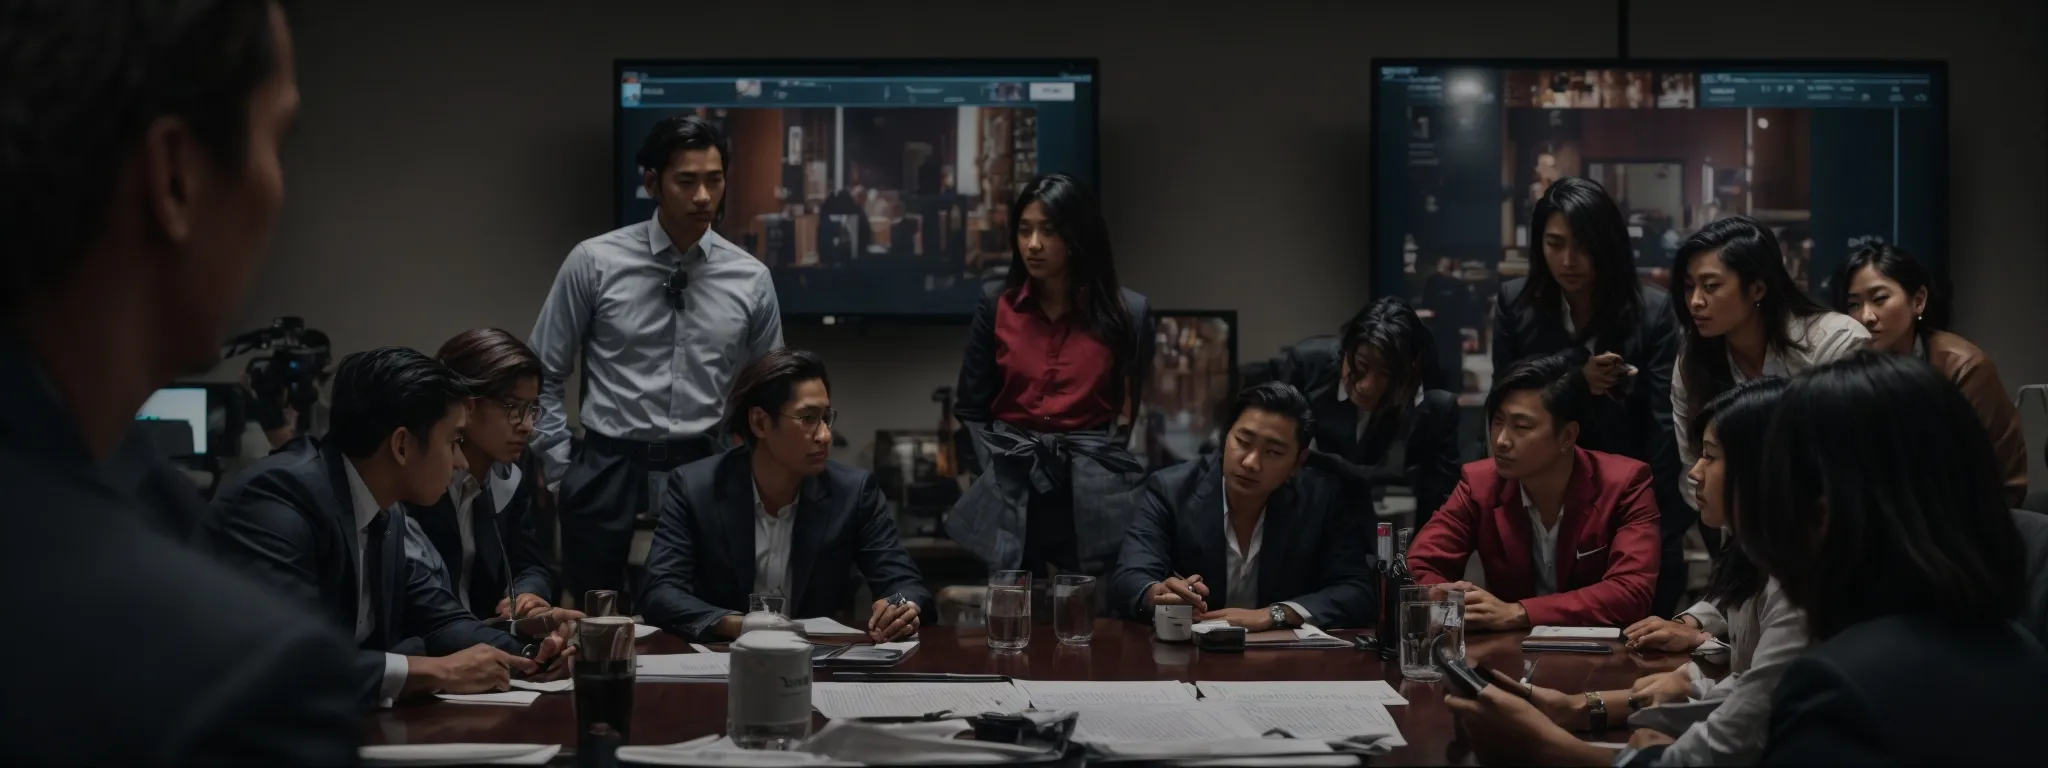 a group of professionals is gathered around a conference table, discussing strategies with various social media icons displayed on a screen in the background.